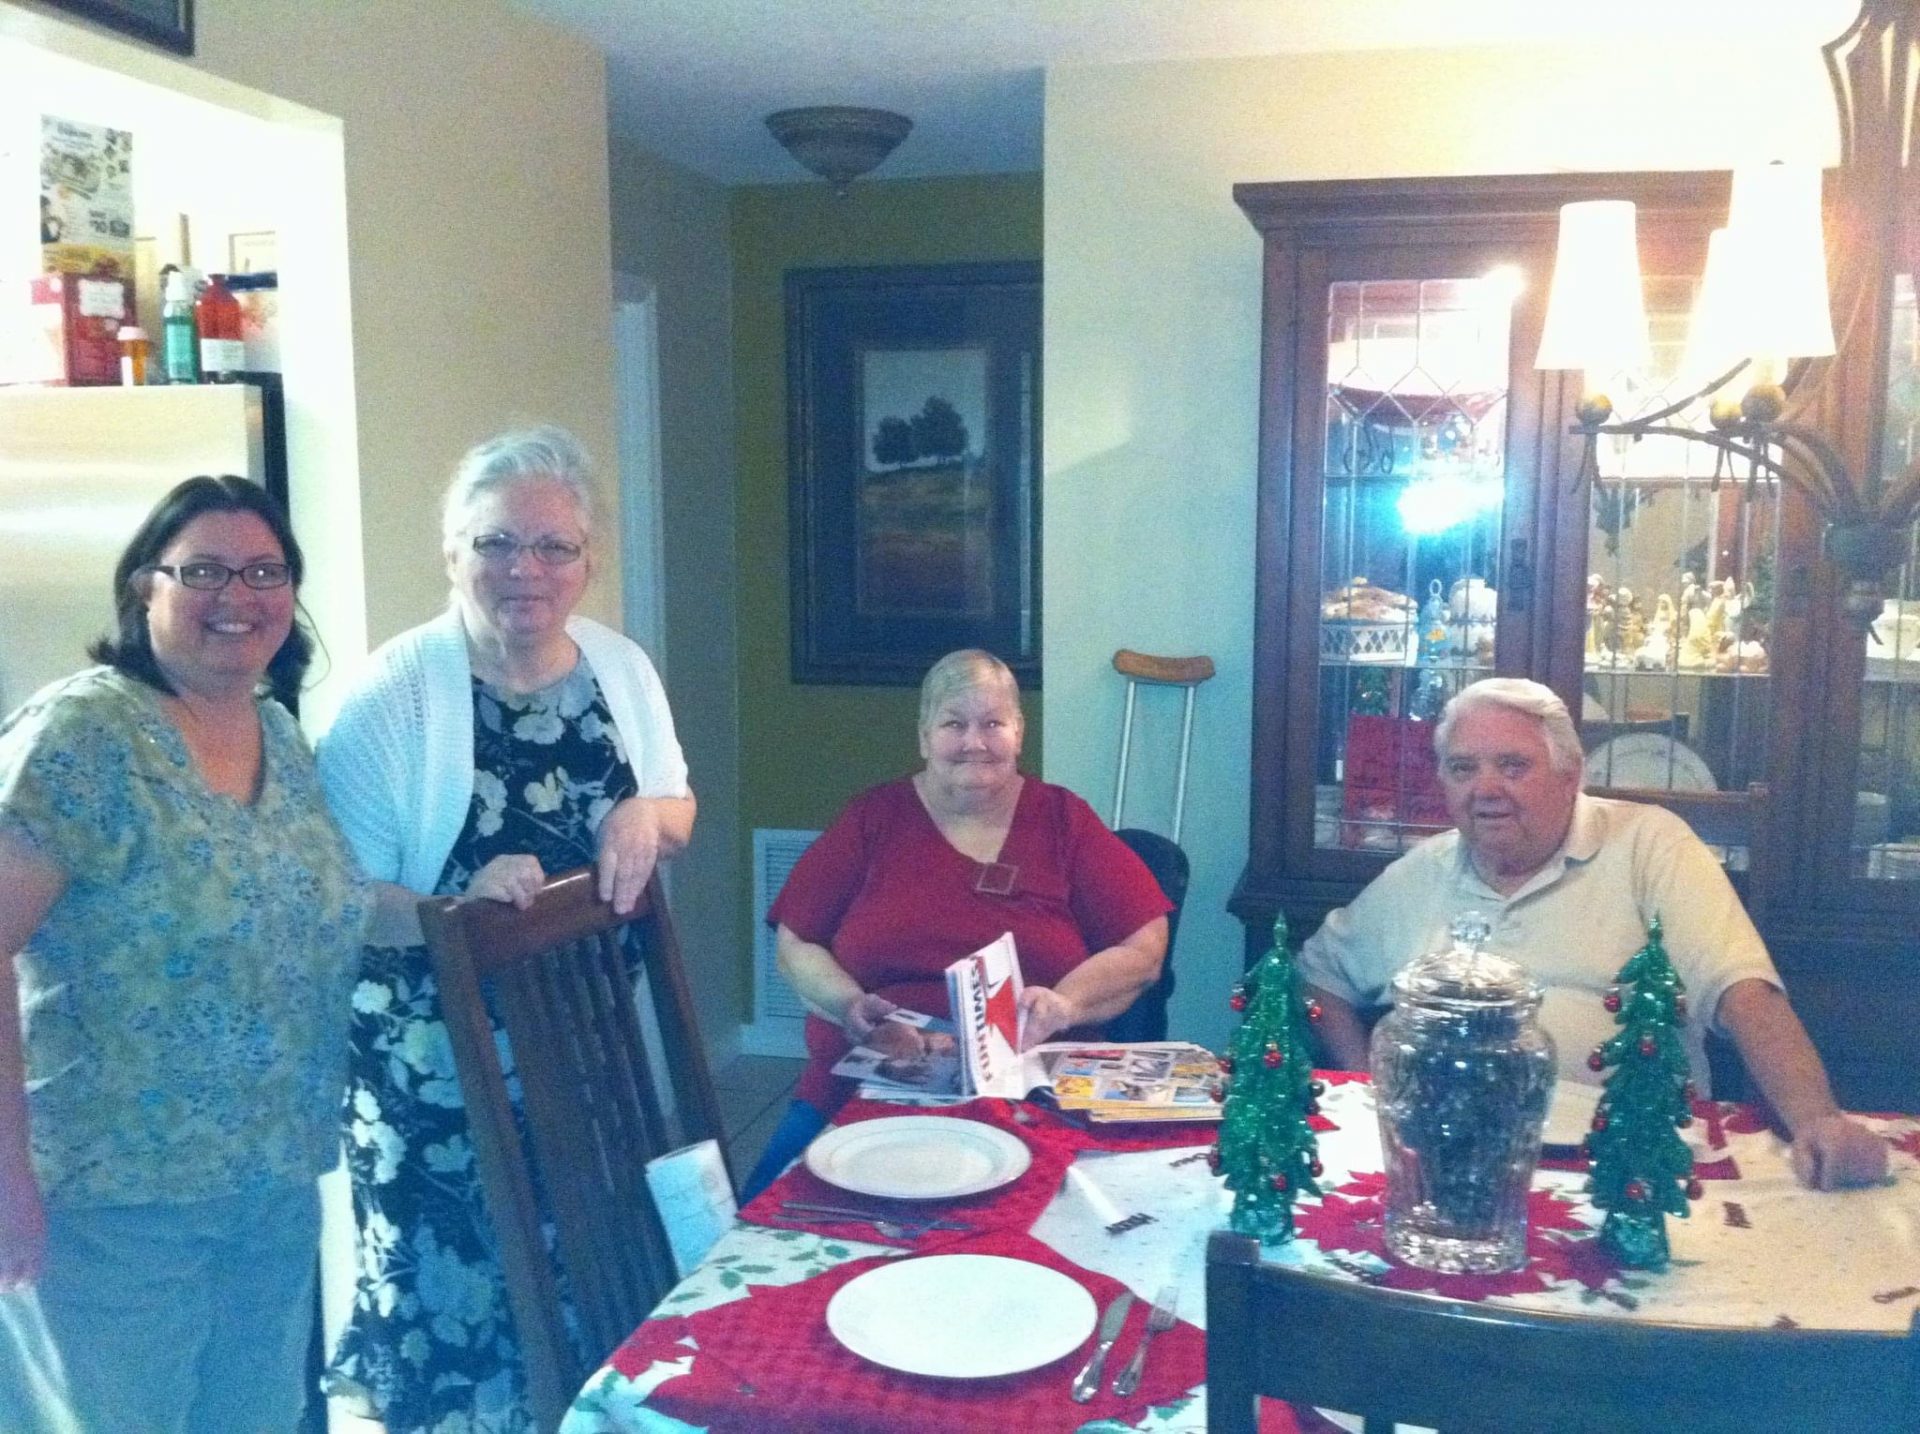 Christmas Eve dinner at my house with Melissa, Erby, Diane and my mom